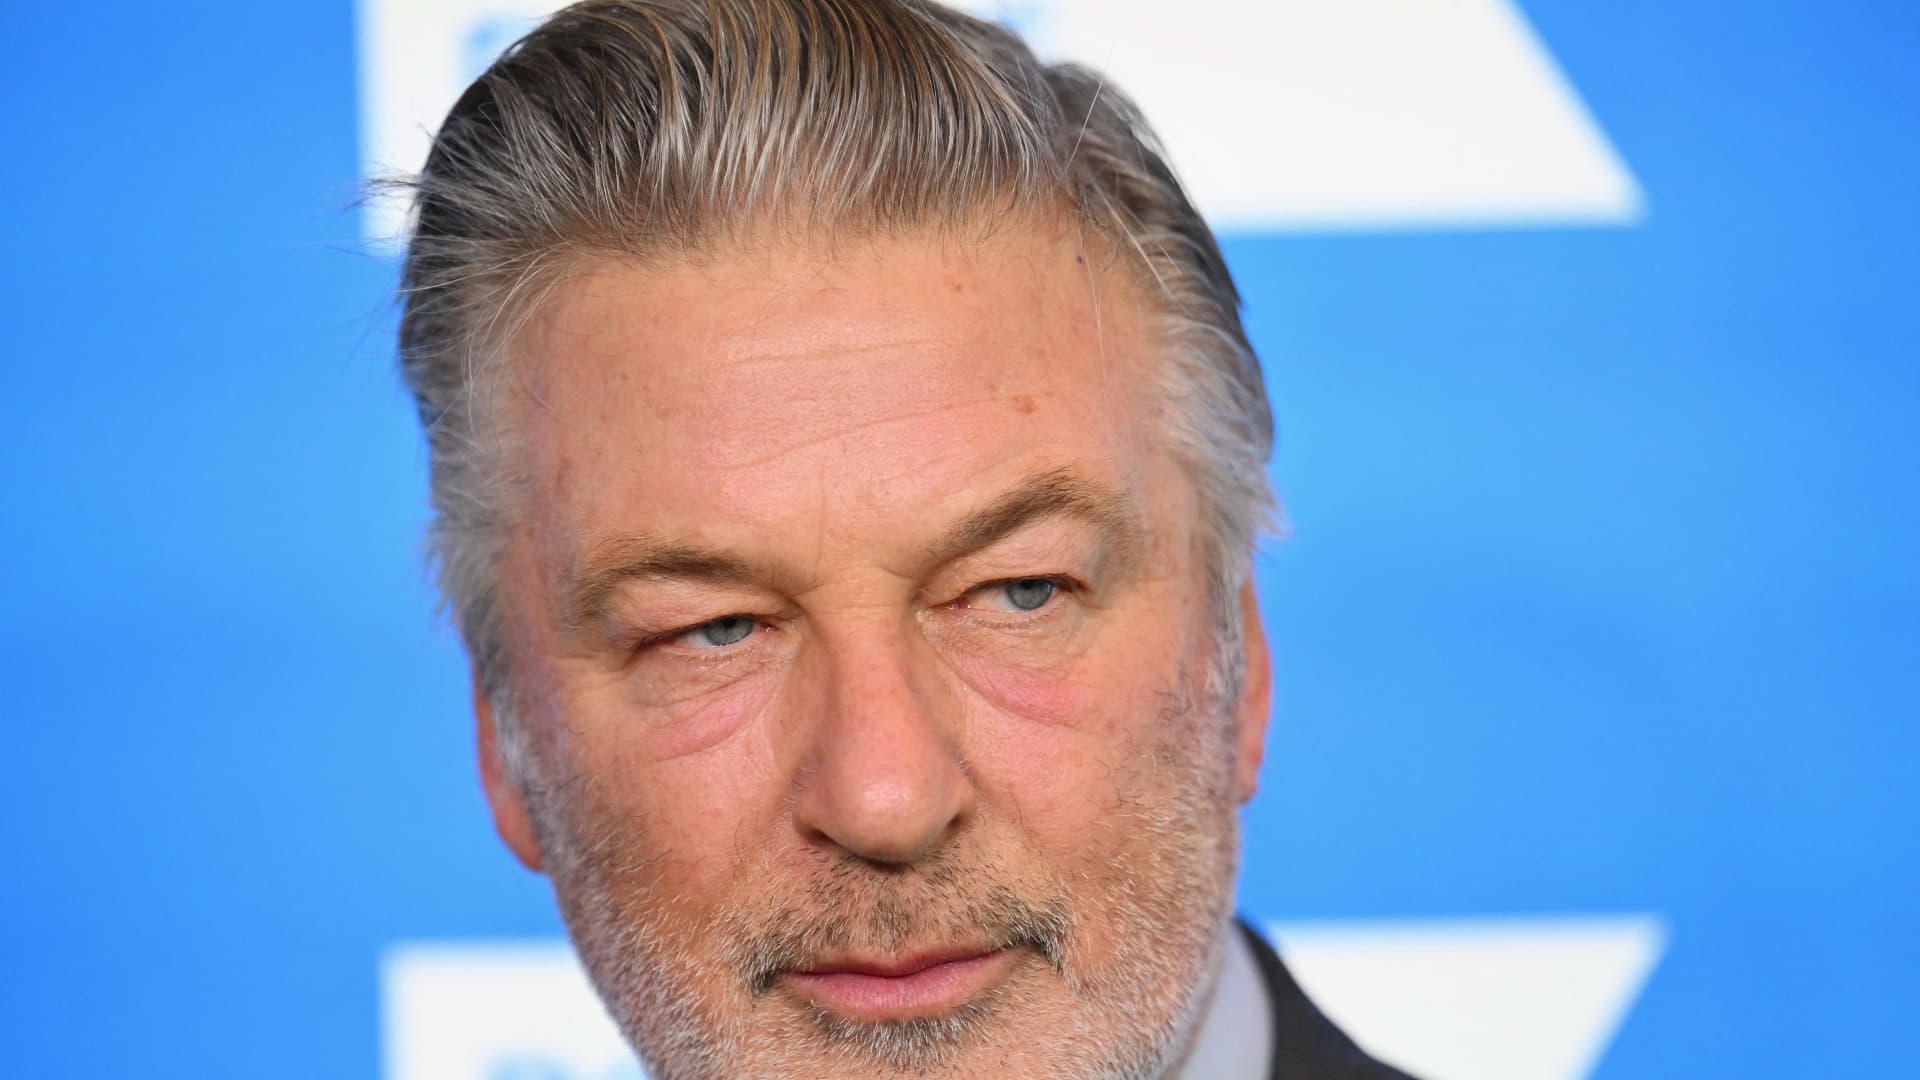 Alec Baldwin charged in 'Rust' shooting, prosecutors say he was 'distracted' during training - CNBC